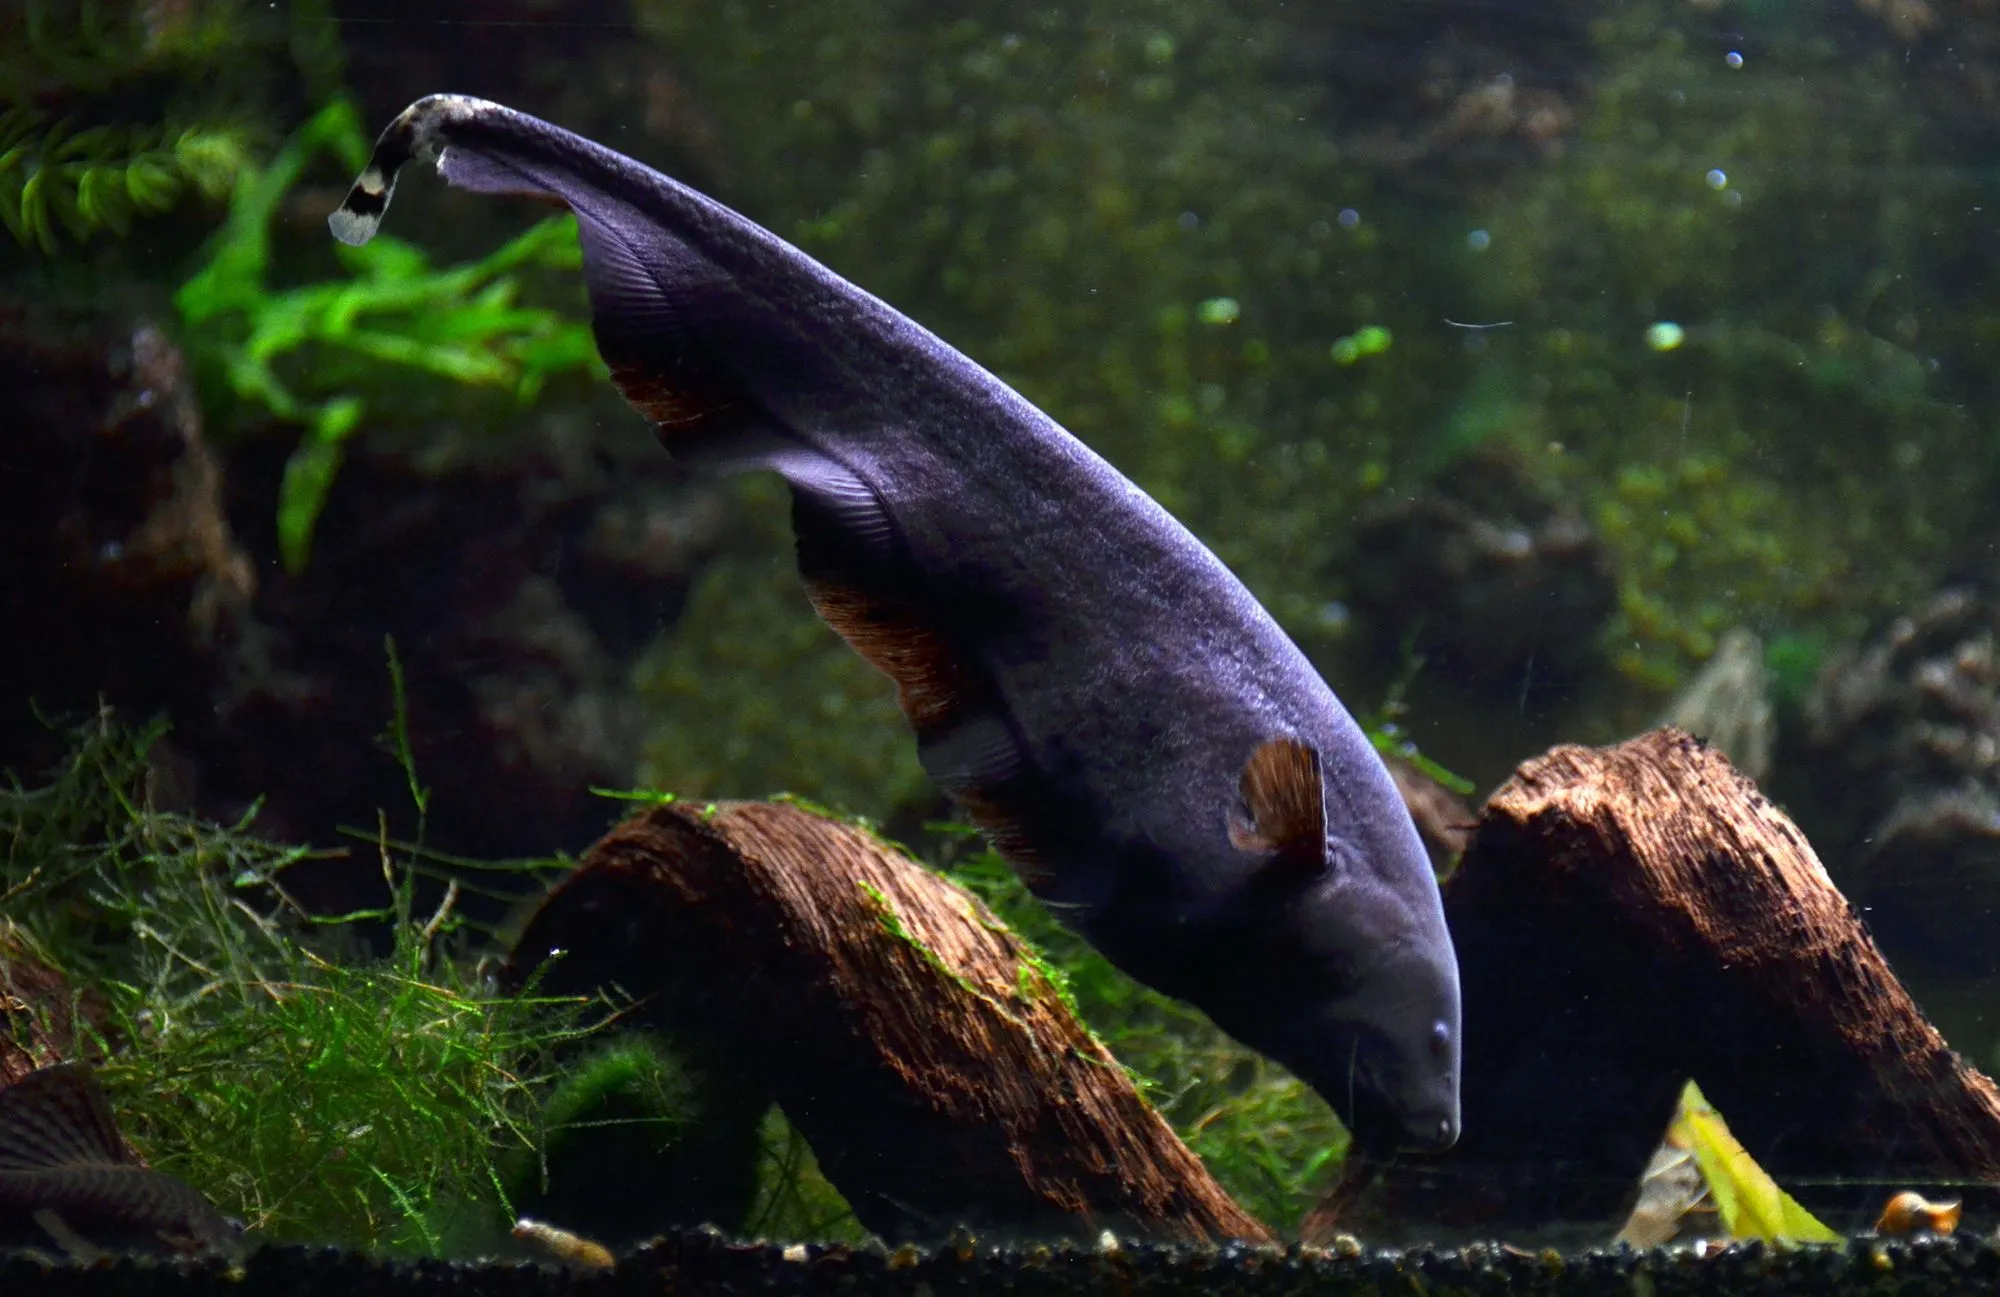 These rare black ghost knifefish facts would make you love them